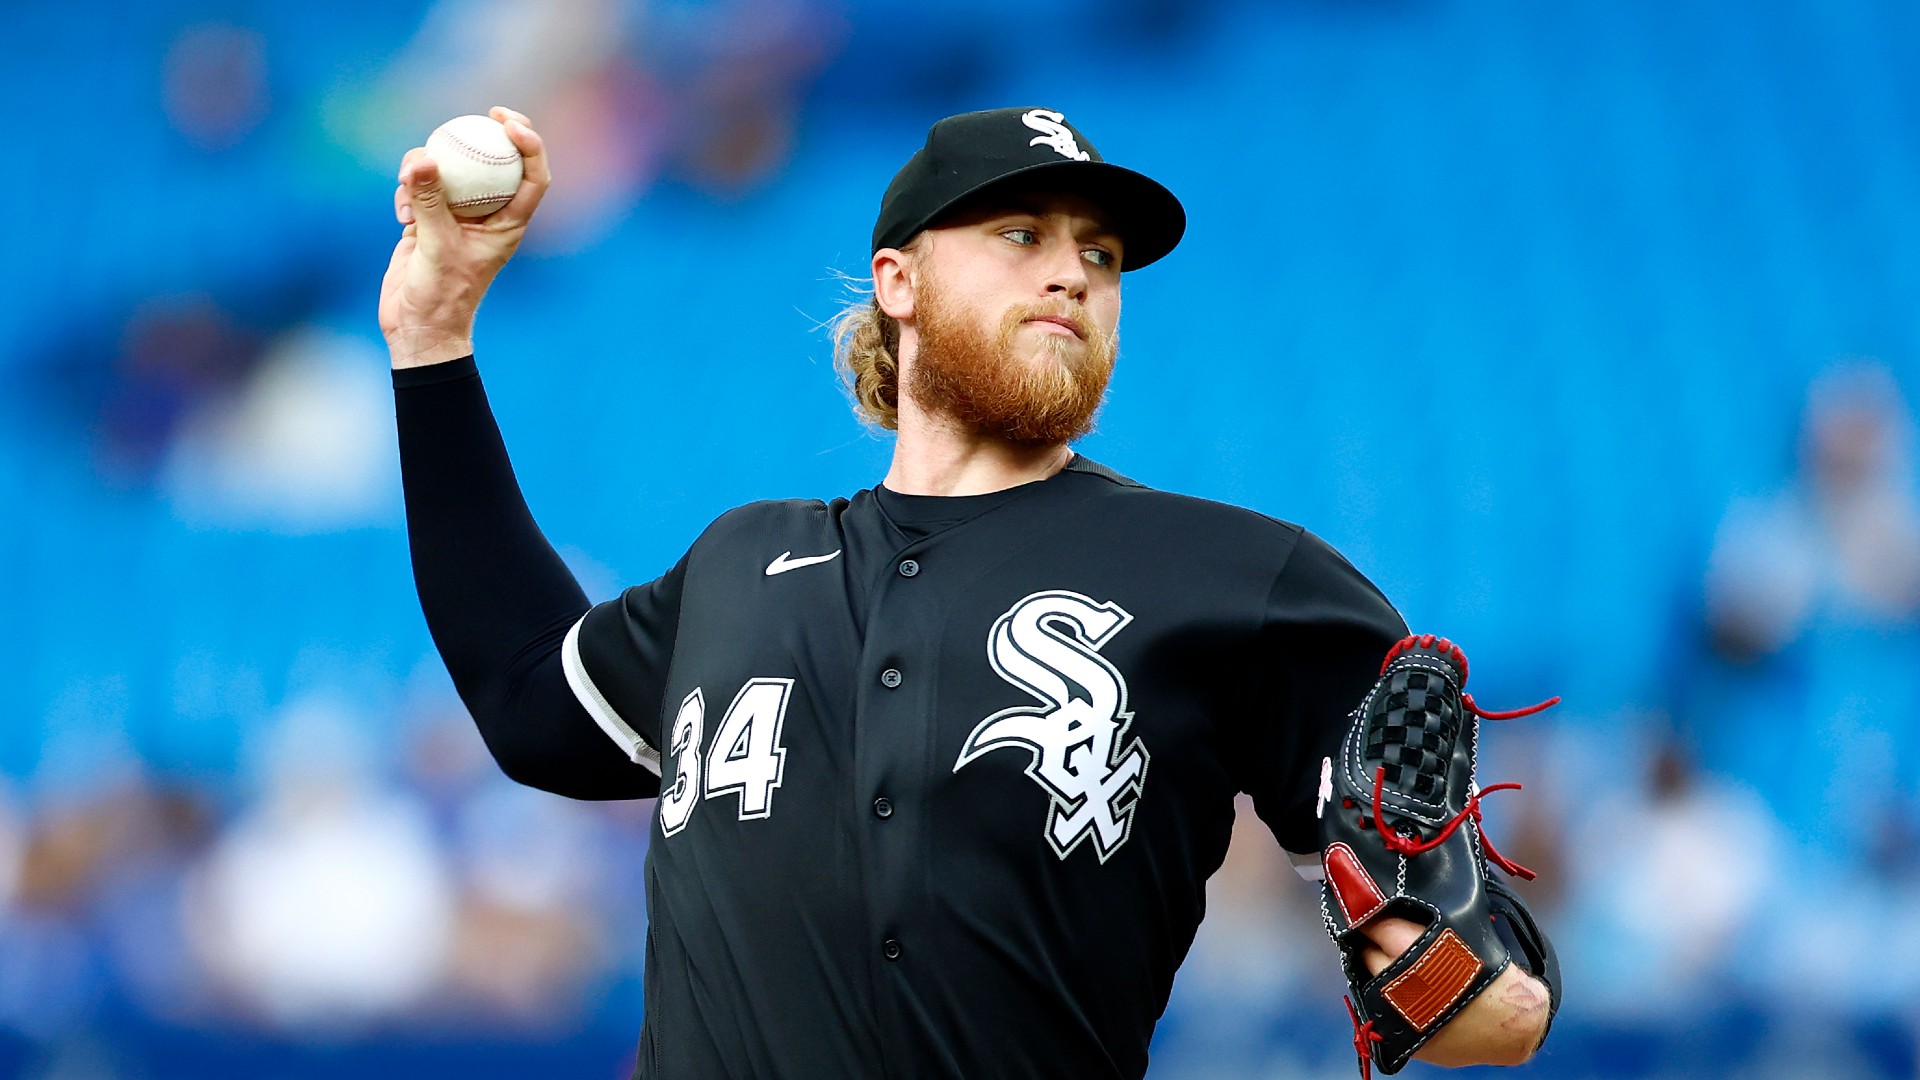 White Sox vs. Royals MLB Odds, Picks, Predictions: Back Kopech, Lynch to Stifle Offenses (Monday, August 22) article feature image